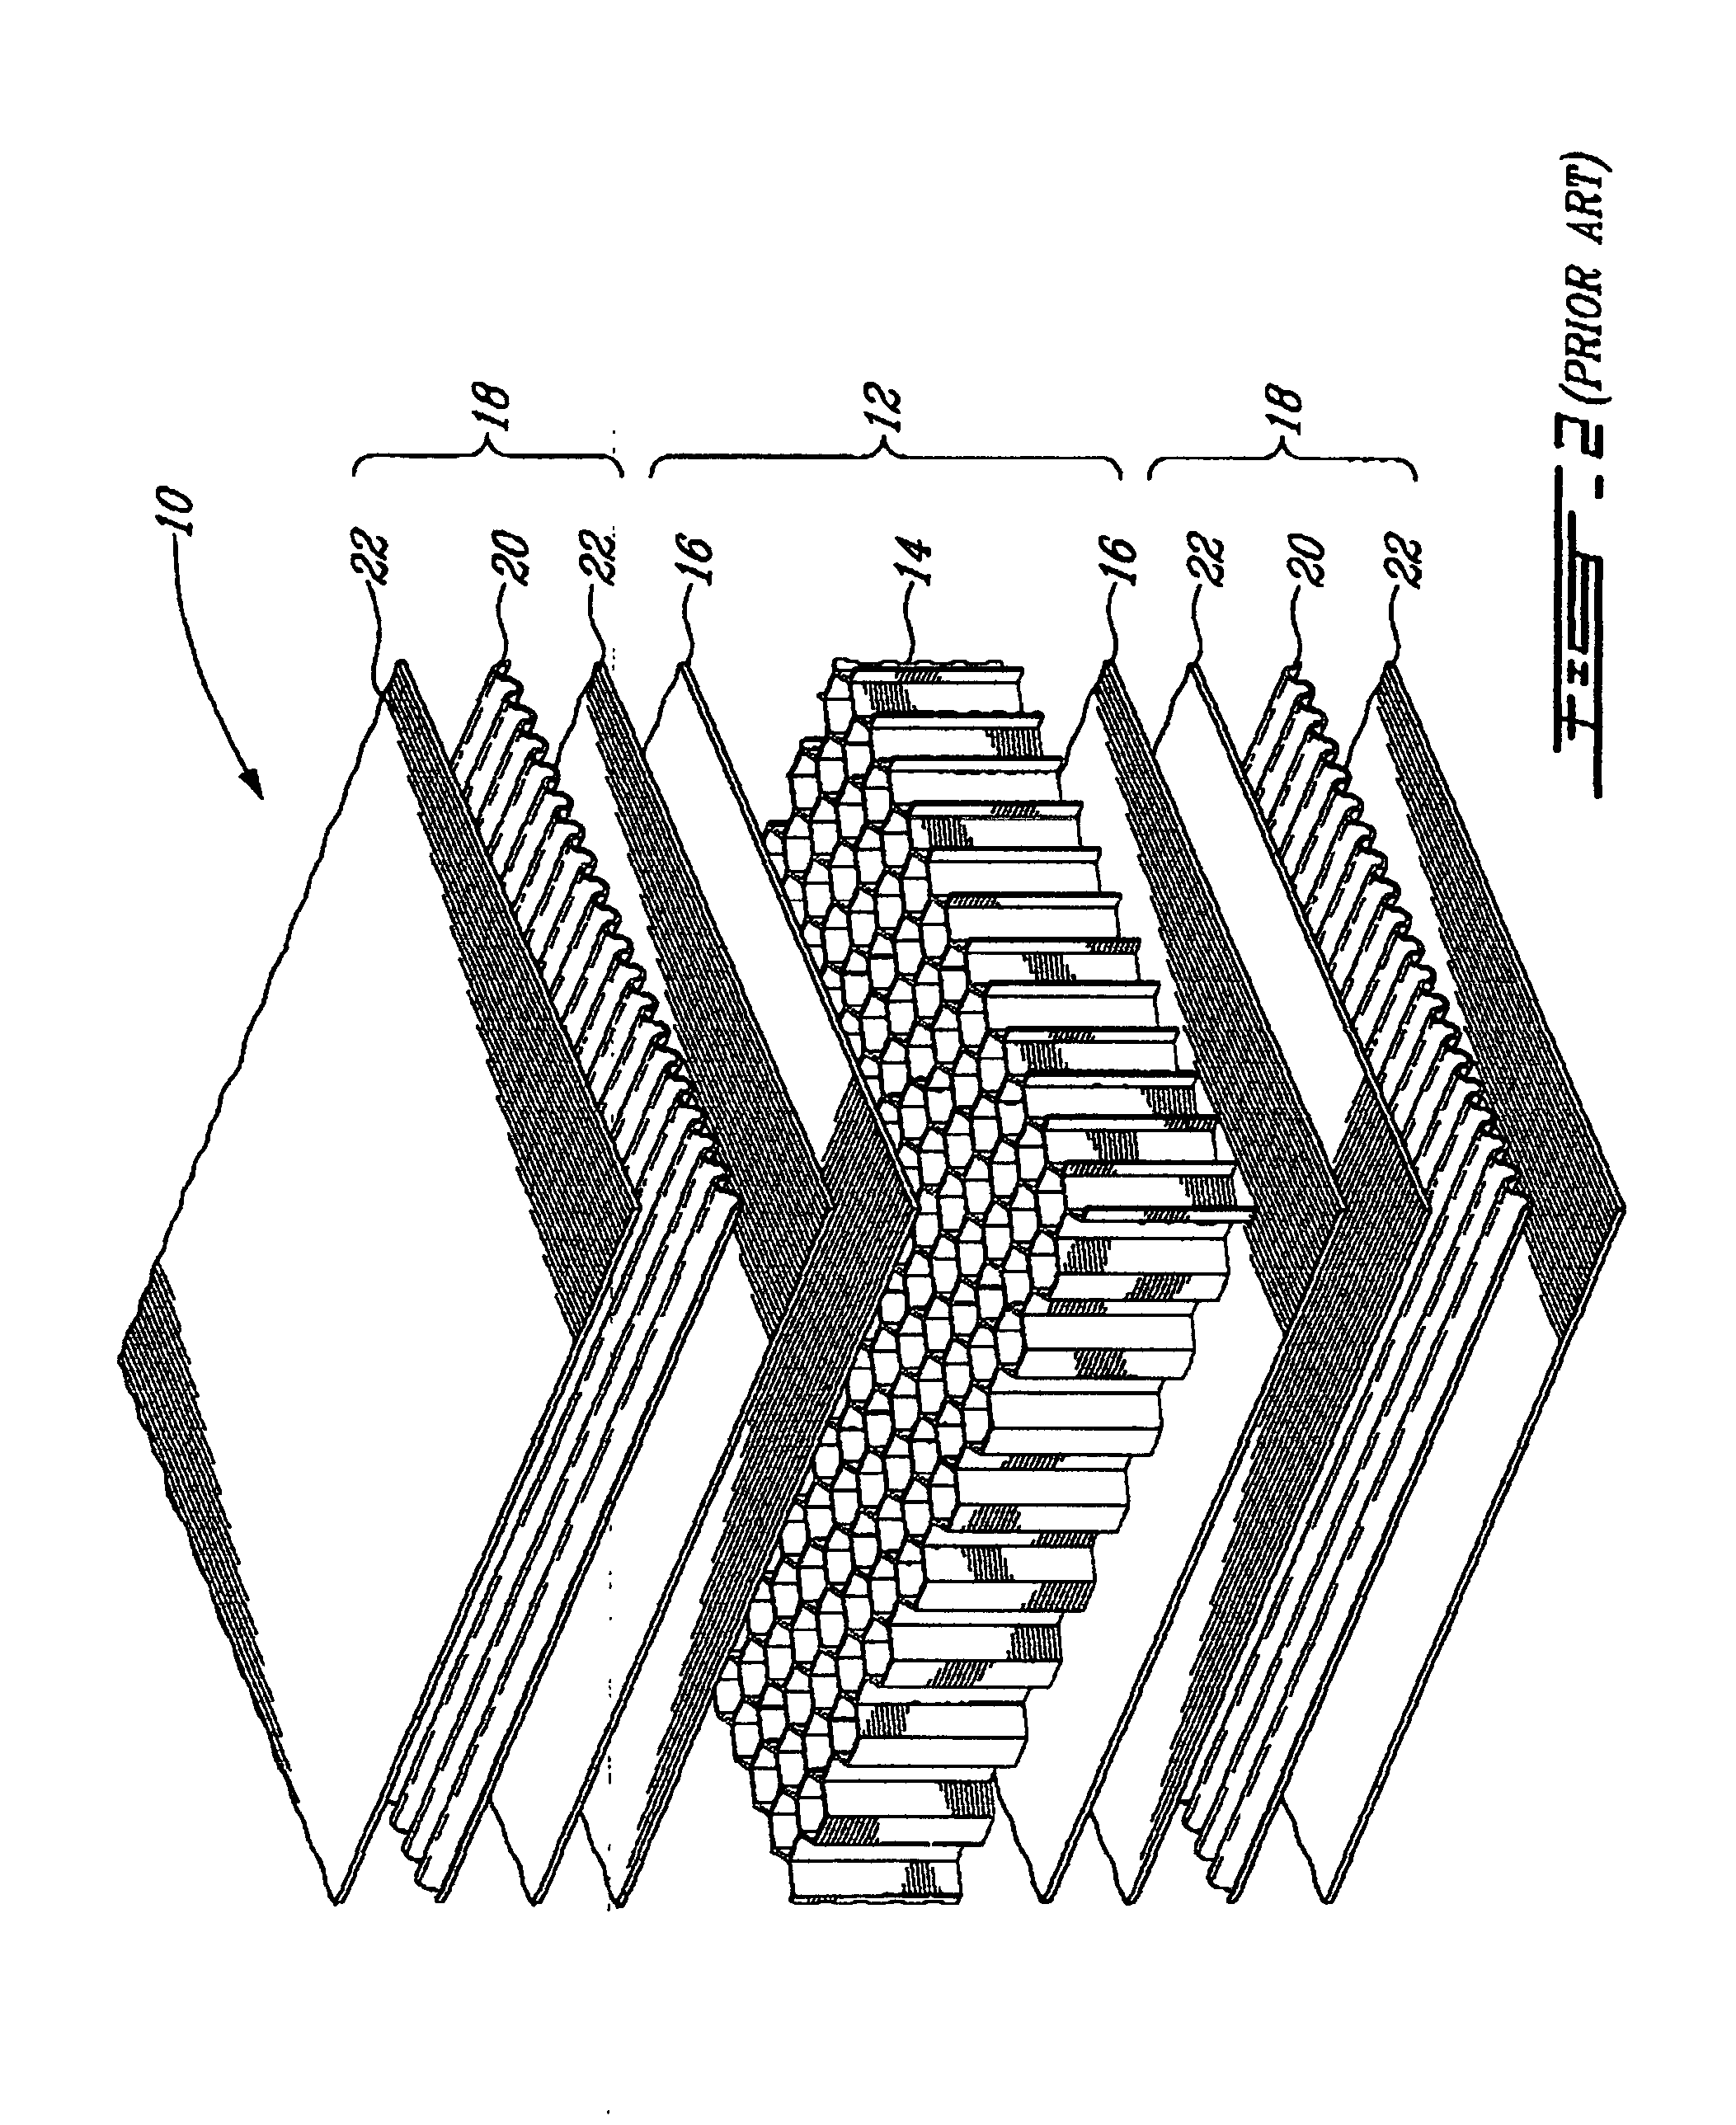 Process and apparatus for manufacturing a honeycomb composite material